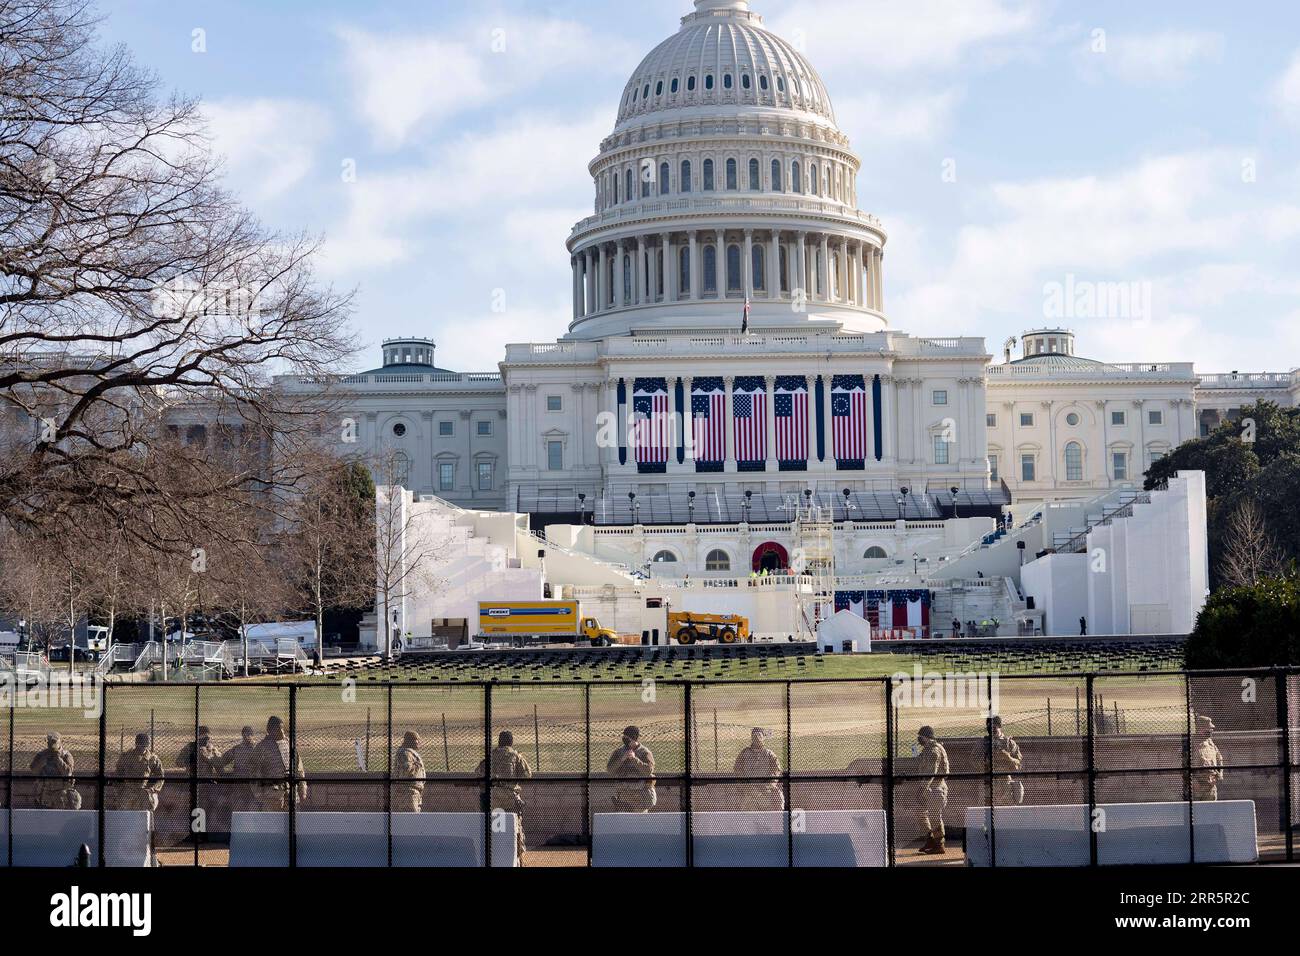 210113 -- WASHINGTON, D.C., Jan. 13, 2021 -- National Guard soldiers secure the U.S. Capitol building in Washington, D.C., the United States, on Jan. 13, 2021. A majority of lawmakers in the U.S. House on Wednesday voted for impeaching President Donald Trump over incitement of insurrection, making him the first president to be impeached twice.  U.S.-WASHINGTON, D.C.-TRUMP-SECOND IMPEACHMENT LiuxJie PUBLICATIONxNOTxINxCHN Stock Photo